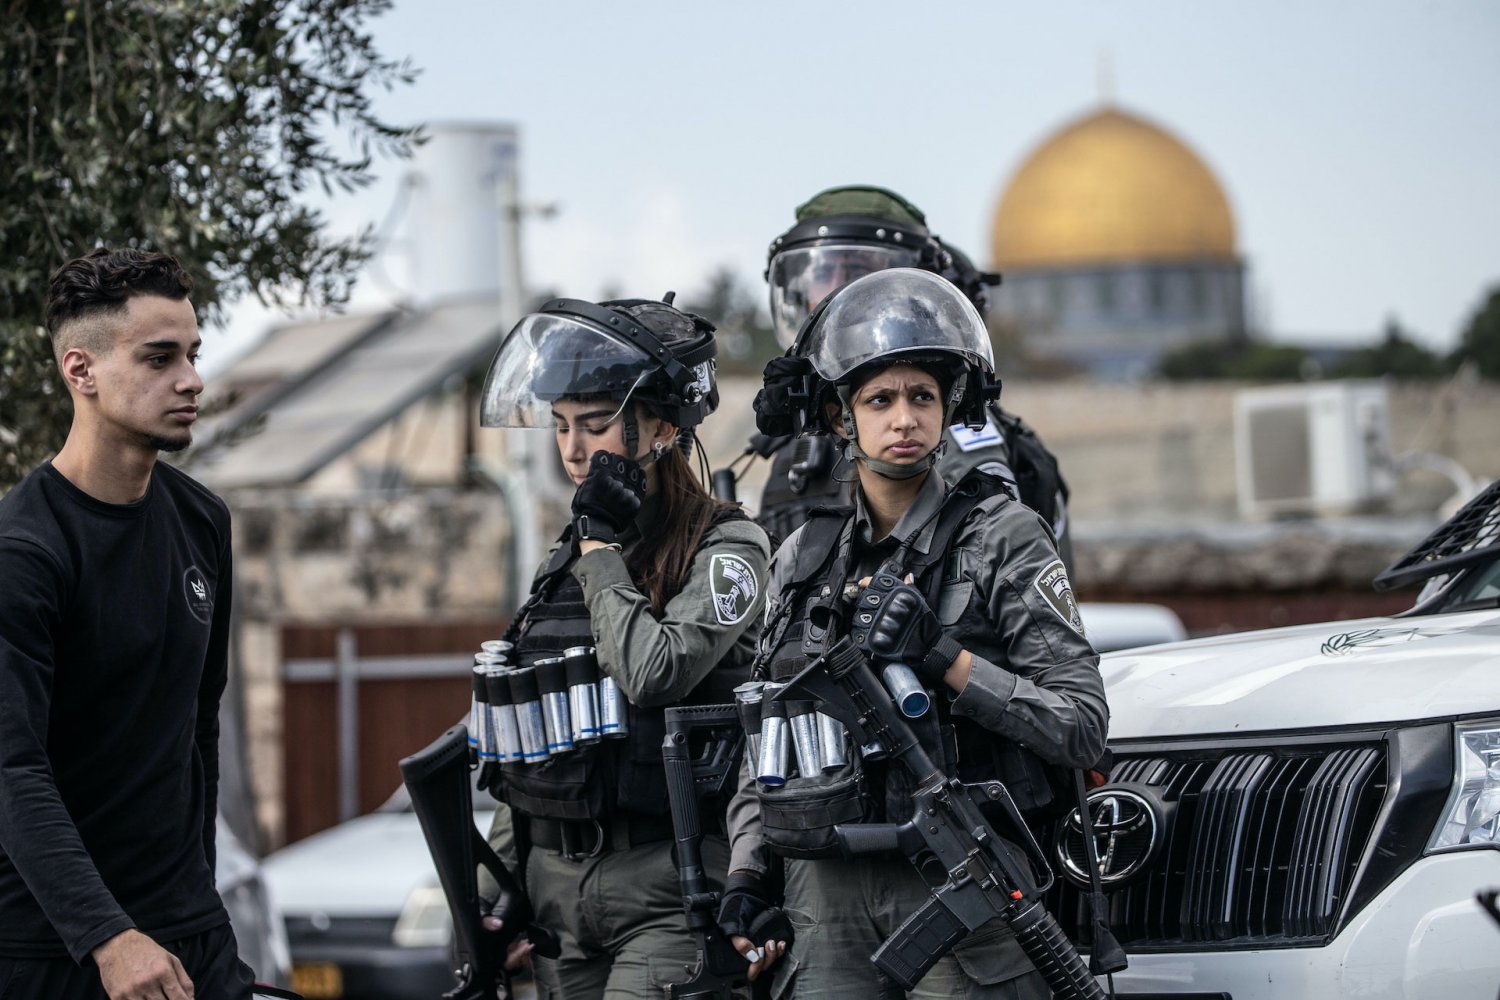 Israeli forces armed to the hilt stand at the ready while Muslims gather to perform Friday prayers in the streets of the Palestinian neighborhood of Ras al-Amud in East Jerusalem, after authorities barred most Muslims from praying at al-Aqsa Mosque. 